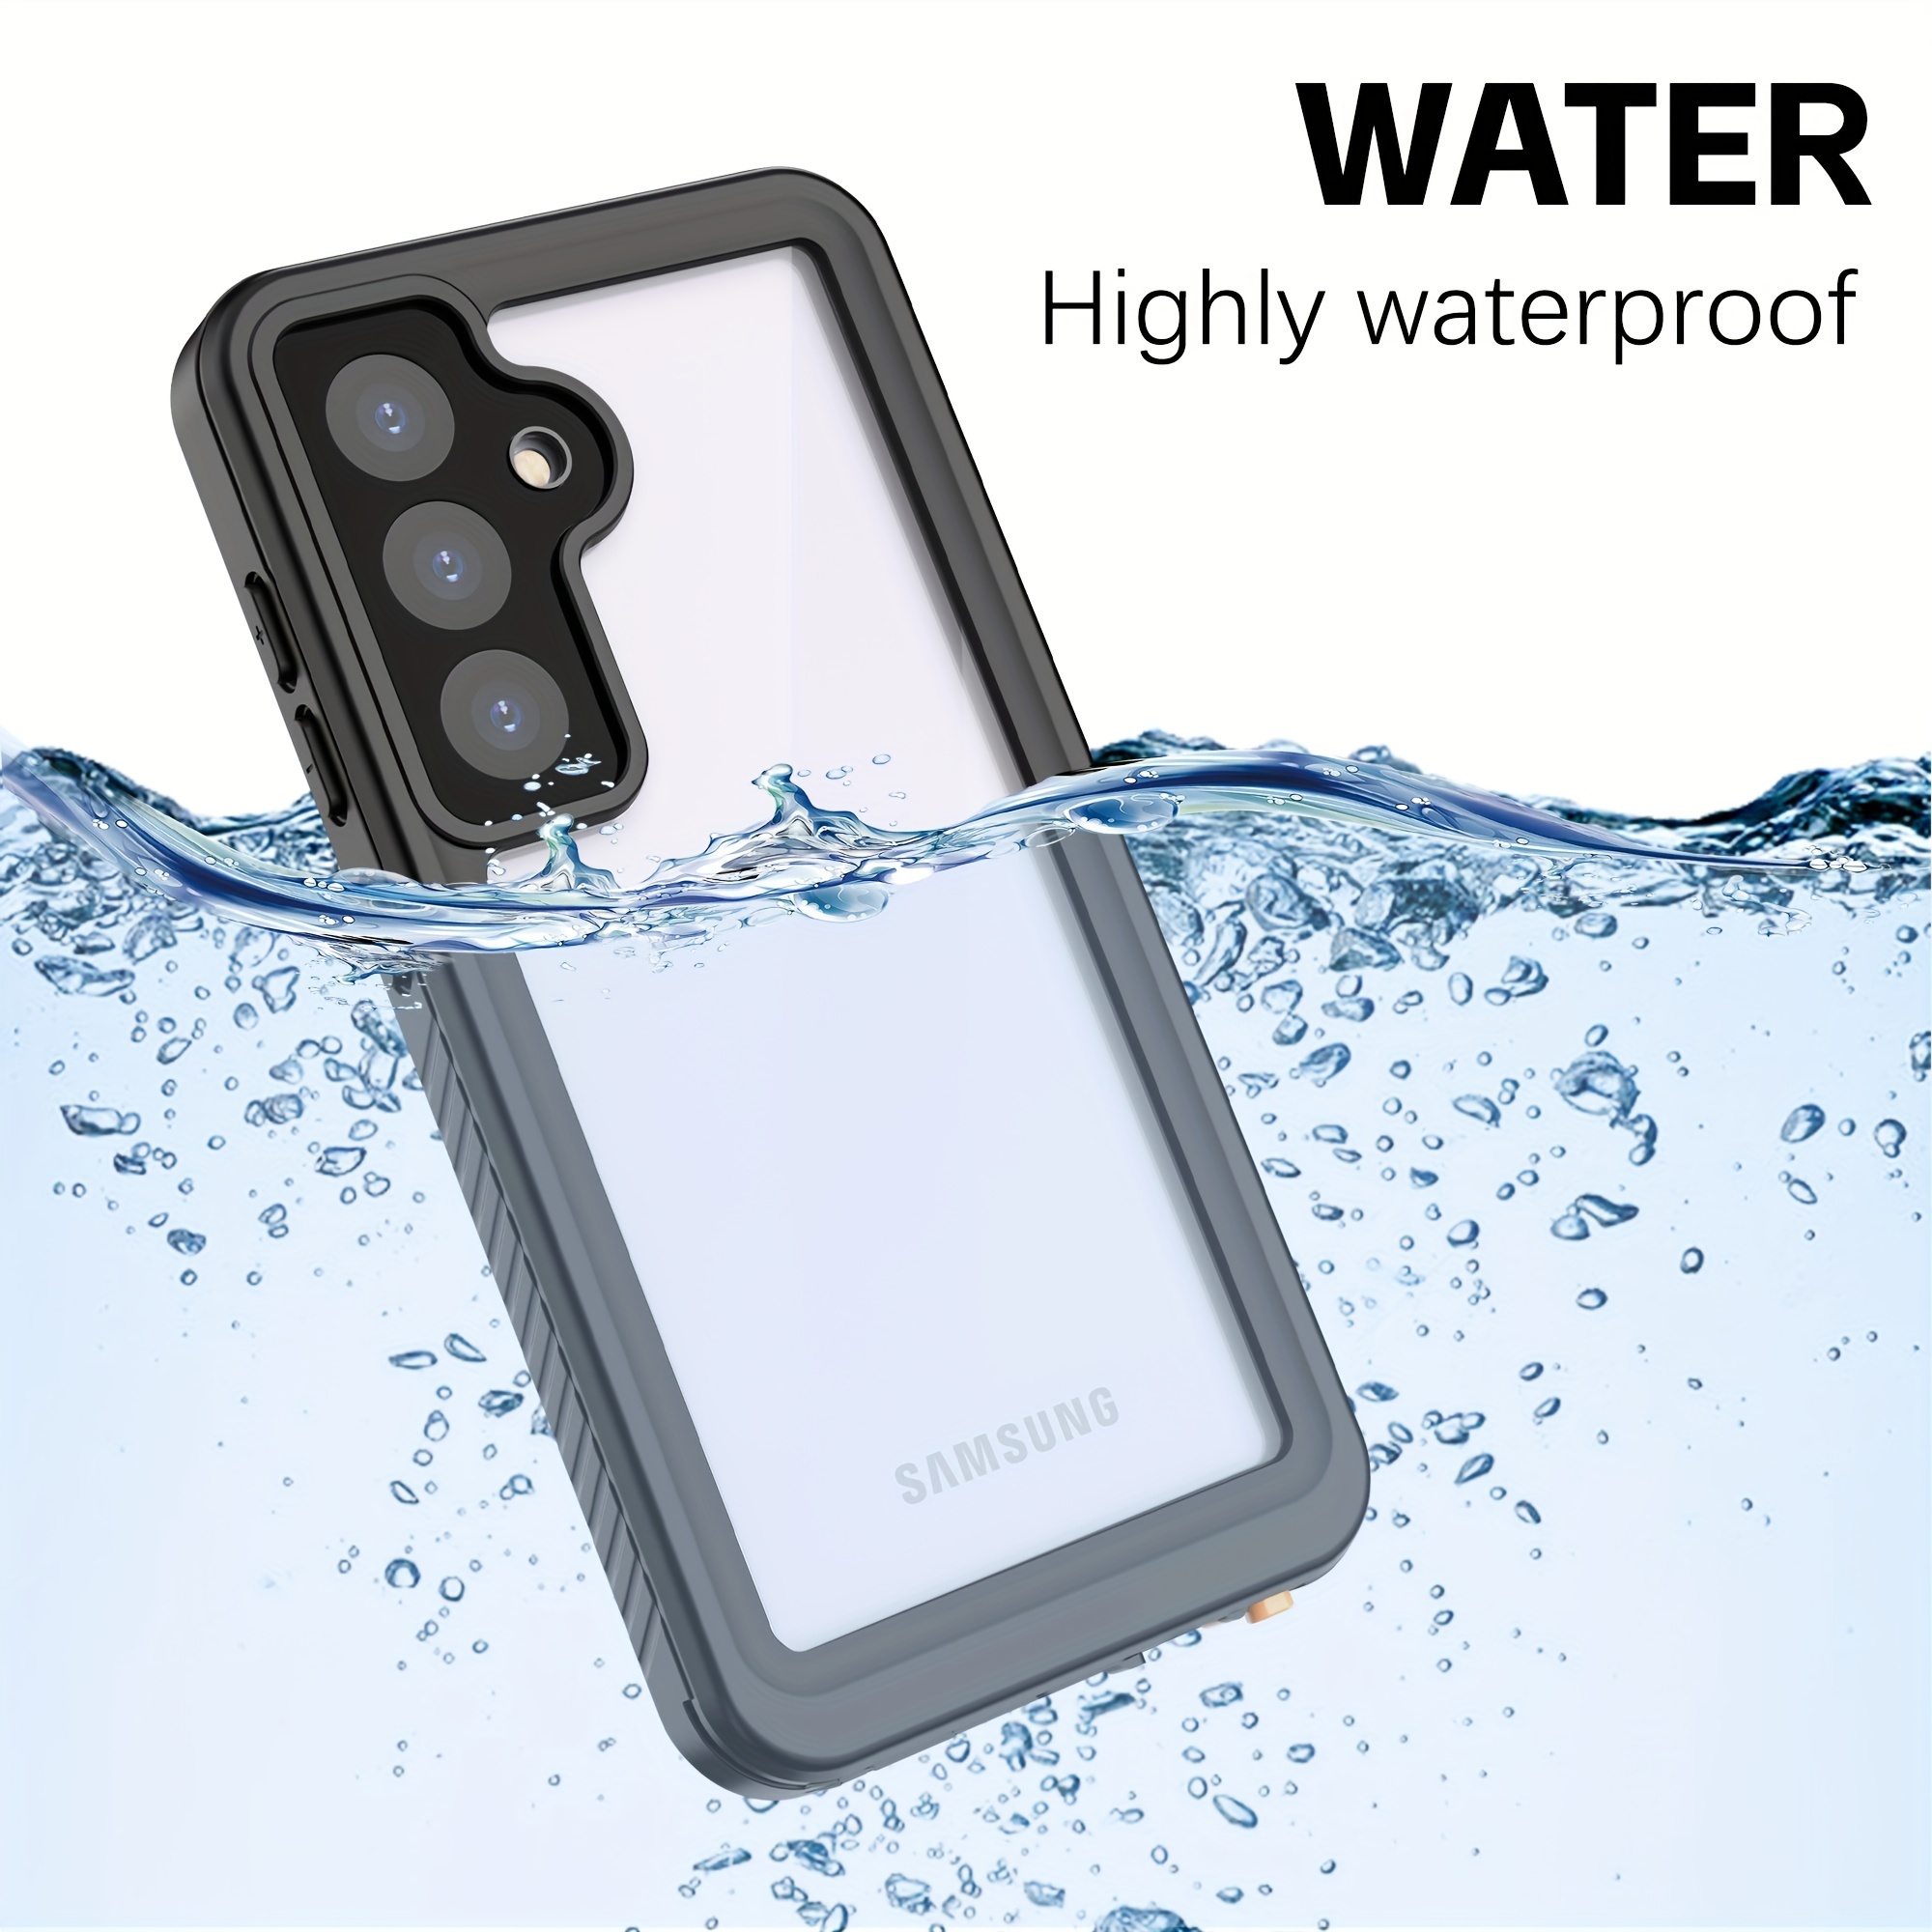 Galaxy S24 Ultra Water/ Shockproof [Extreme Series] With Screen